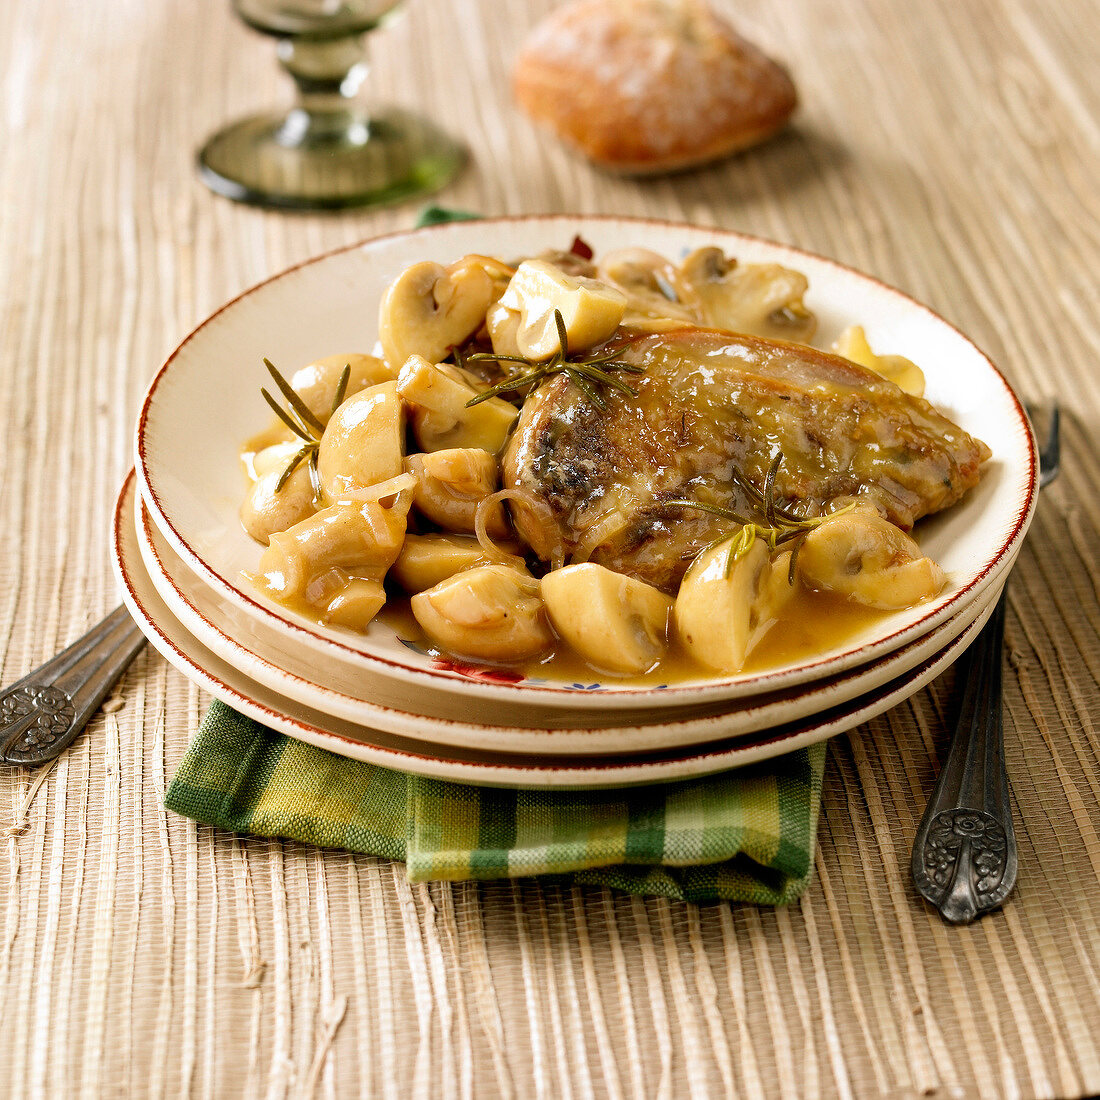 Pheasant with mushrooms and rosemary